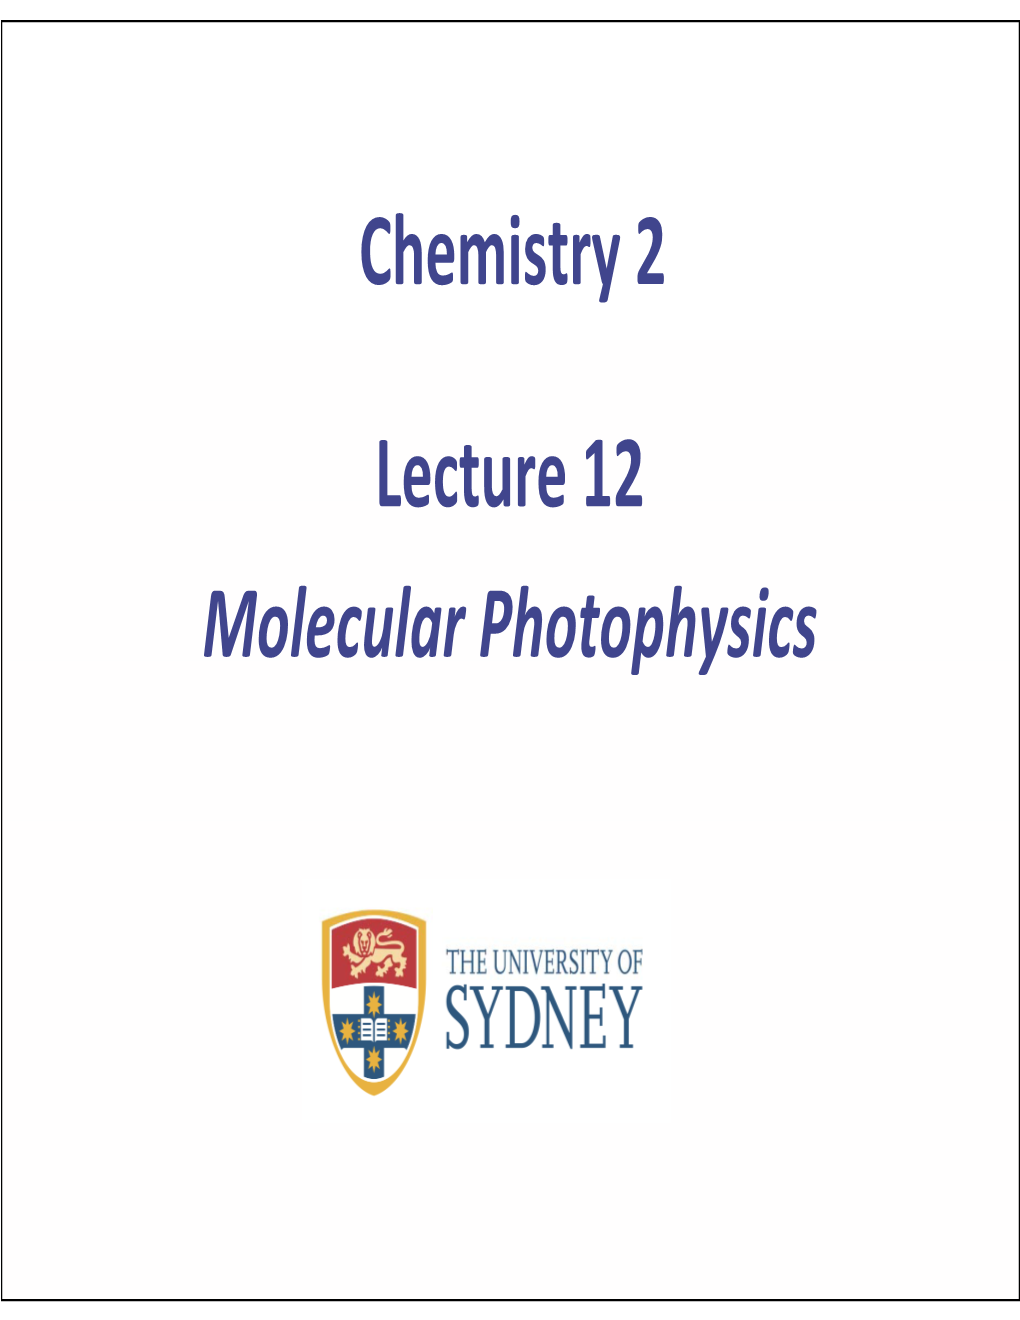 Chemistry 2 Lecture 12 Lecture 12 Molecular Photophysics